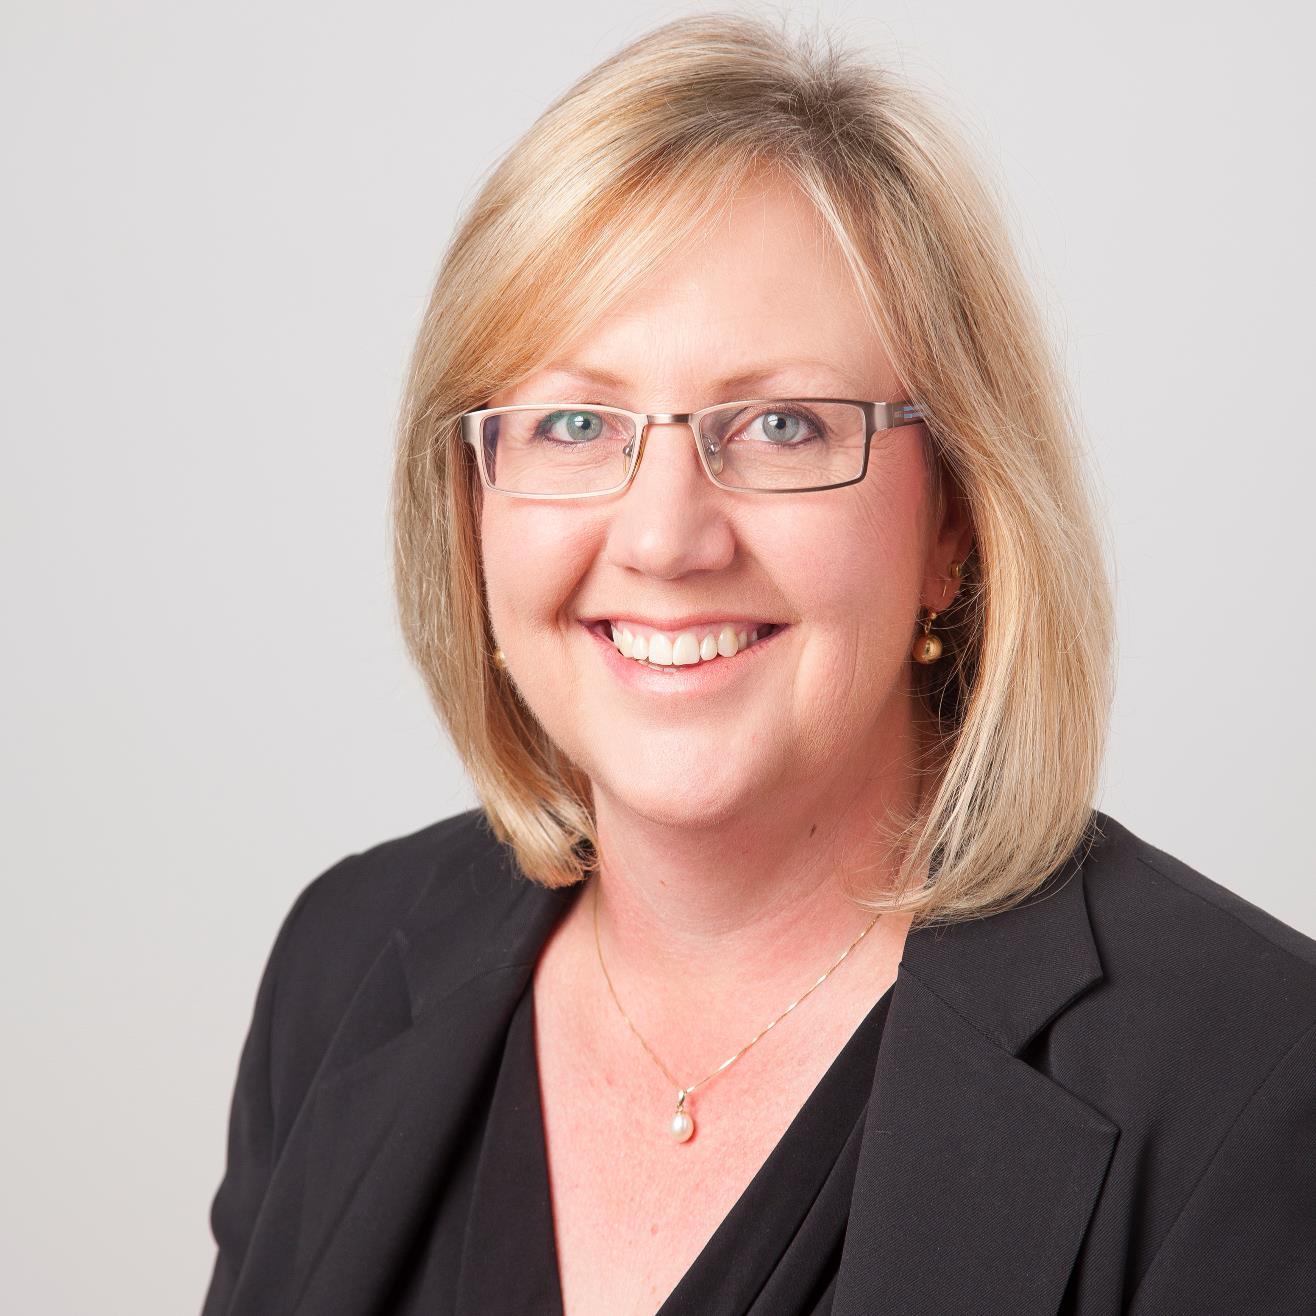 Lynda is the CEO and Owner of Purple Giraffe Marketing Consultancy in Adelaide.